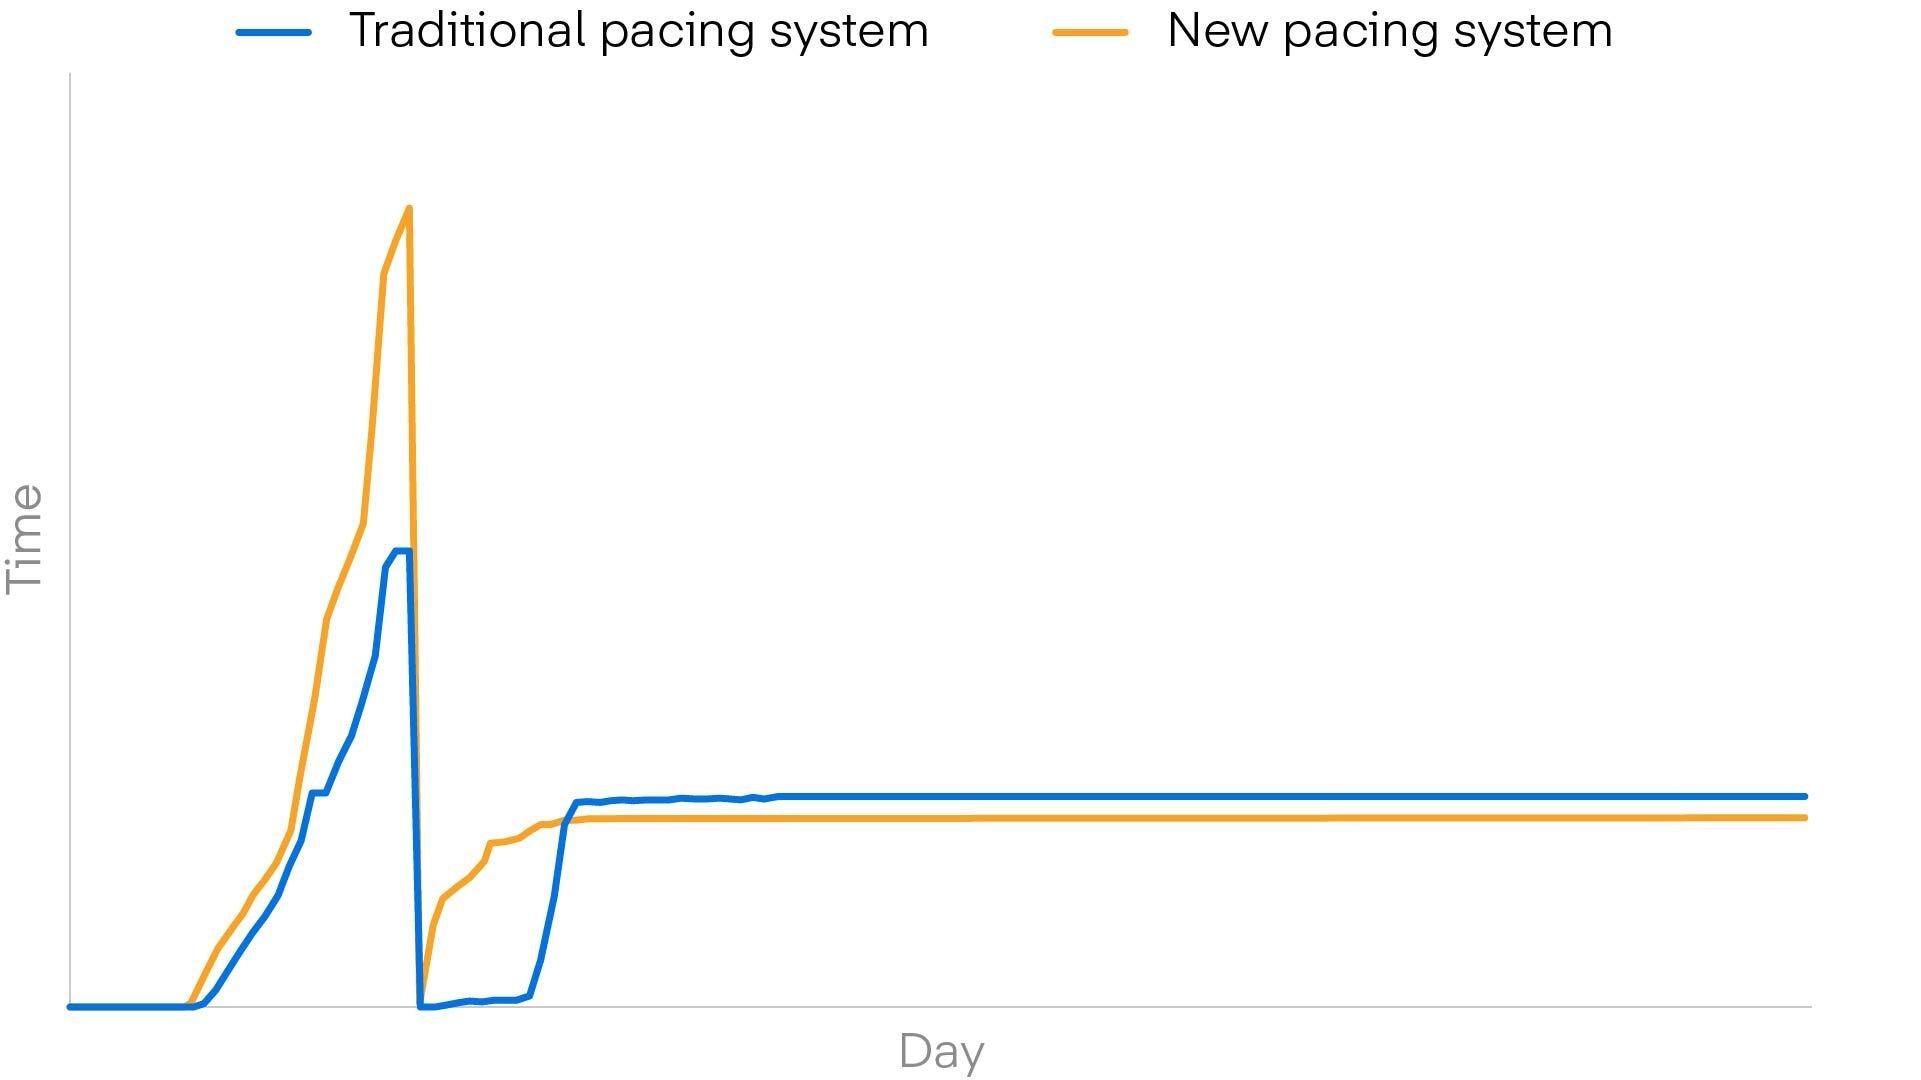 Bar graph showing traditional and new pacing system trends